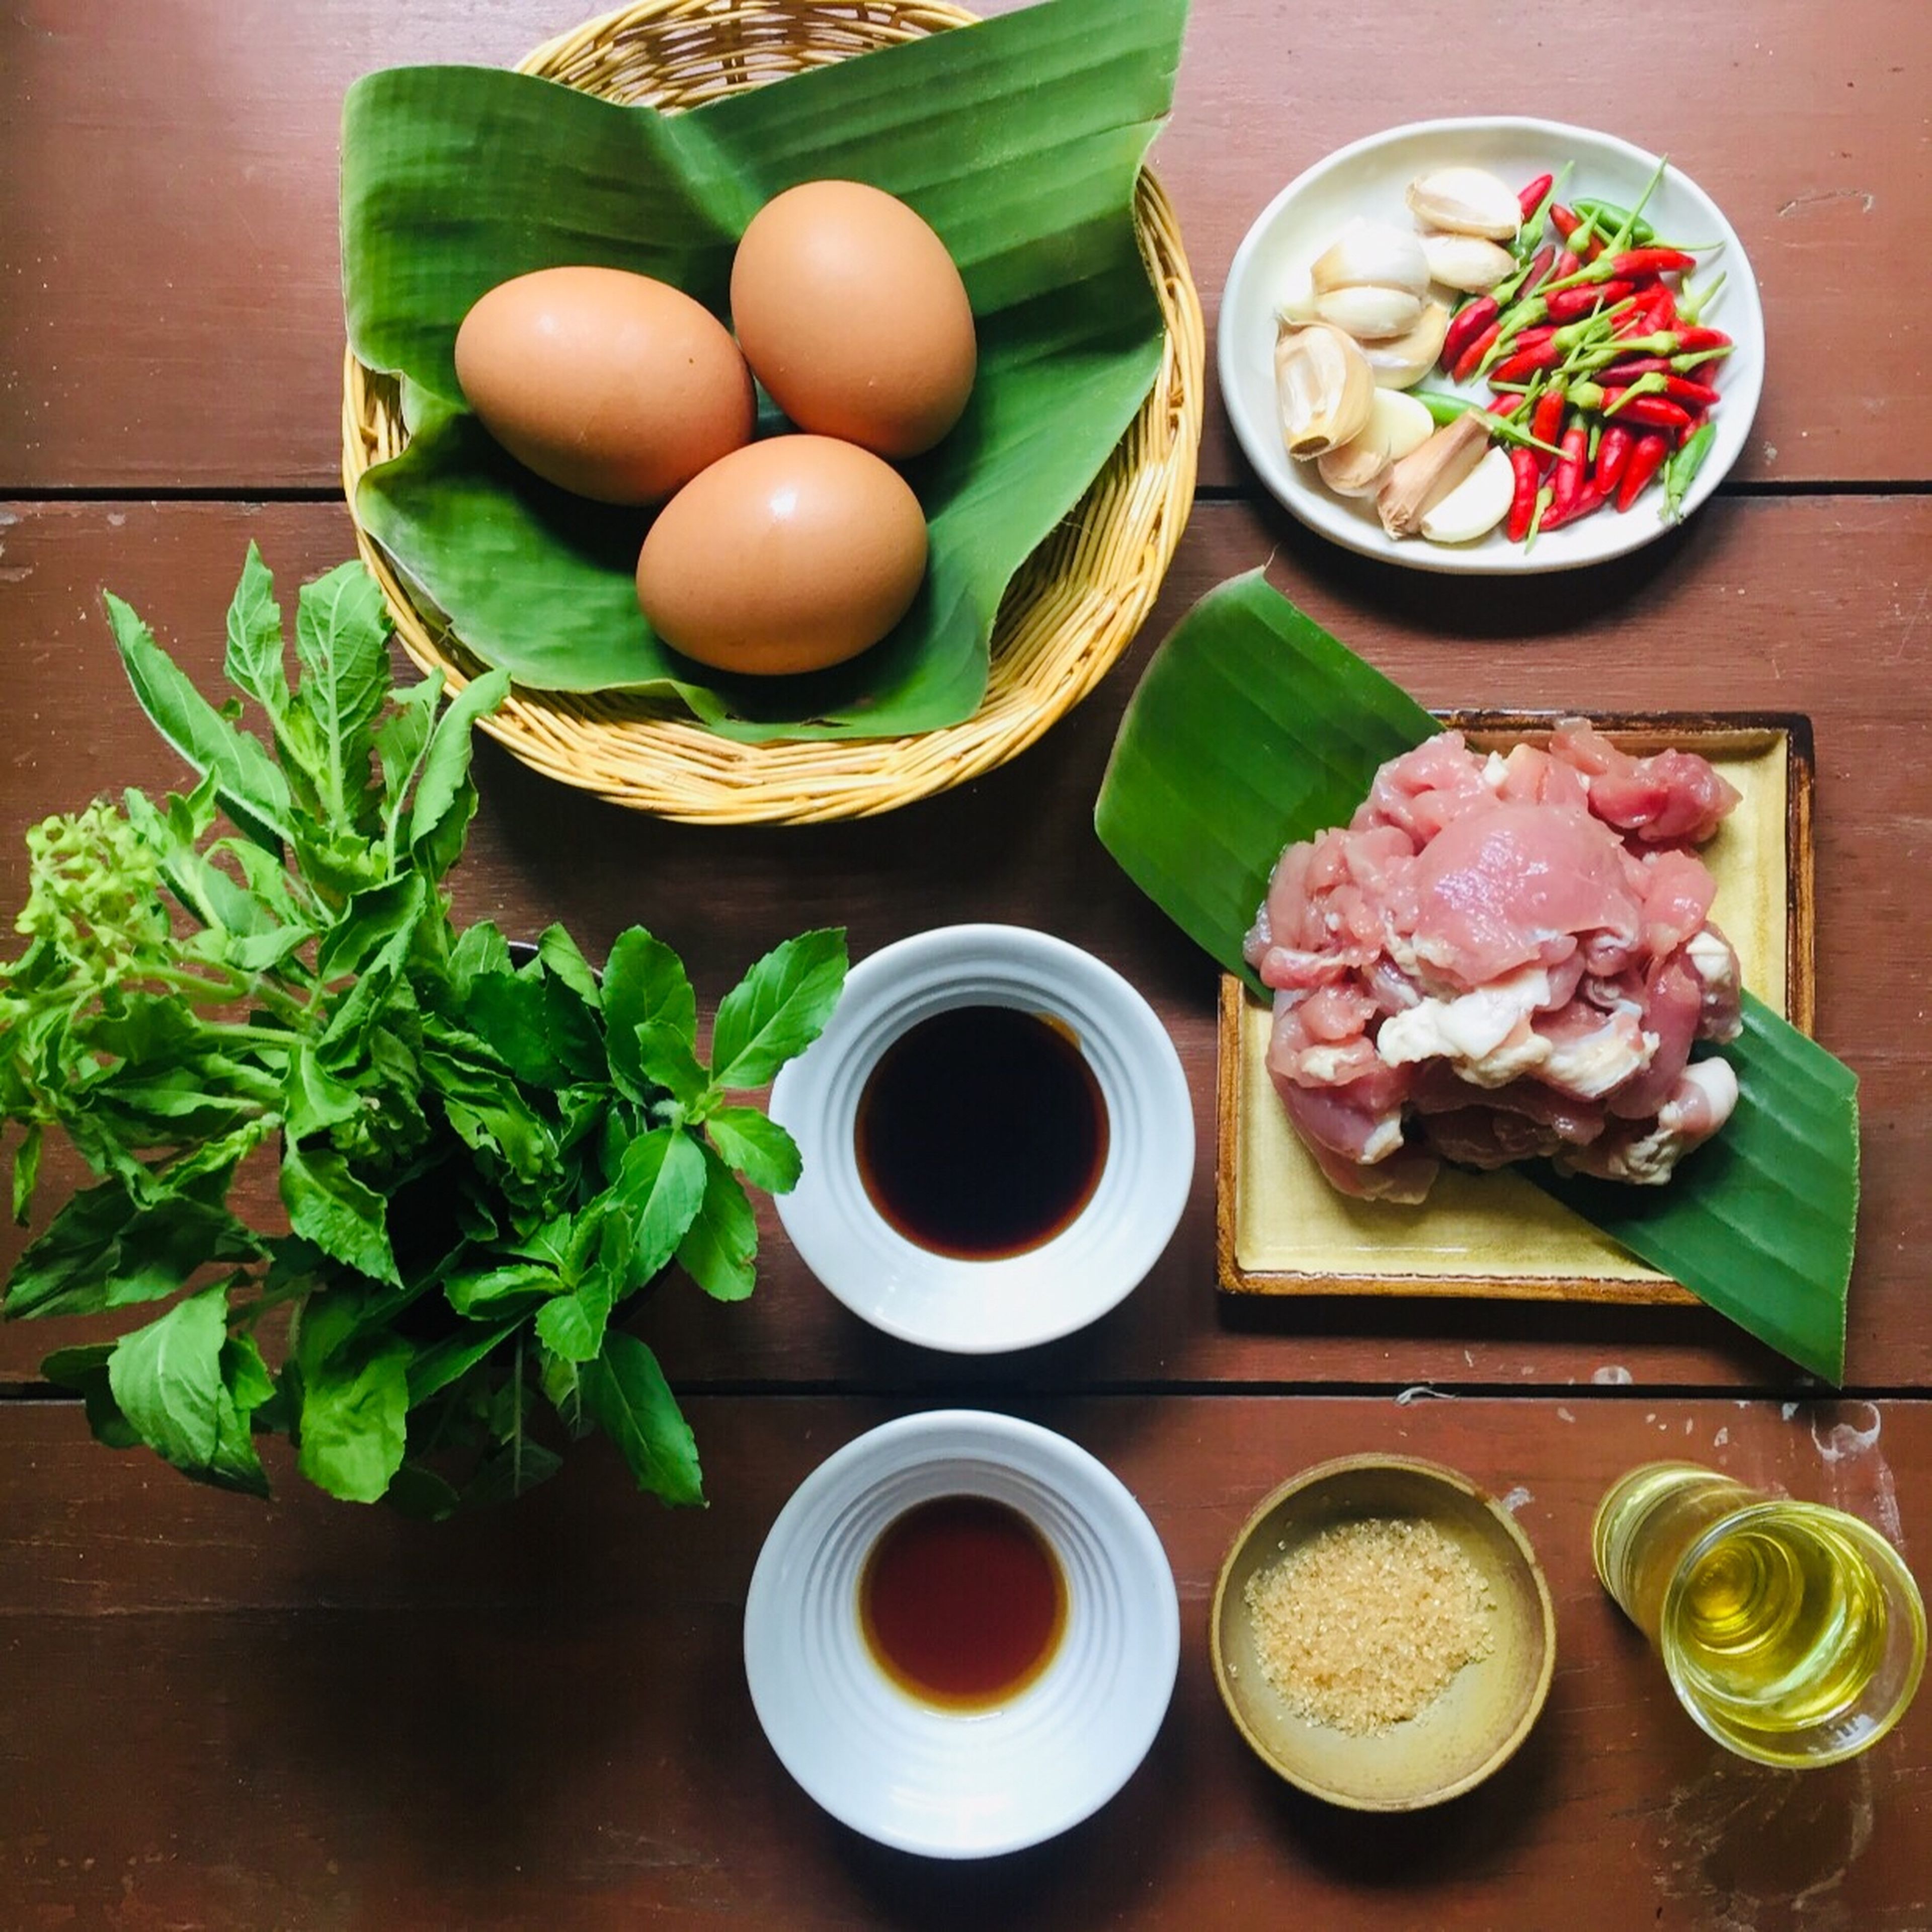 Prepare the ingredients like in the picture and if you can’t find Thai holy basil you can use sweet basil instead.